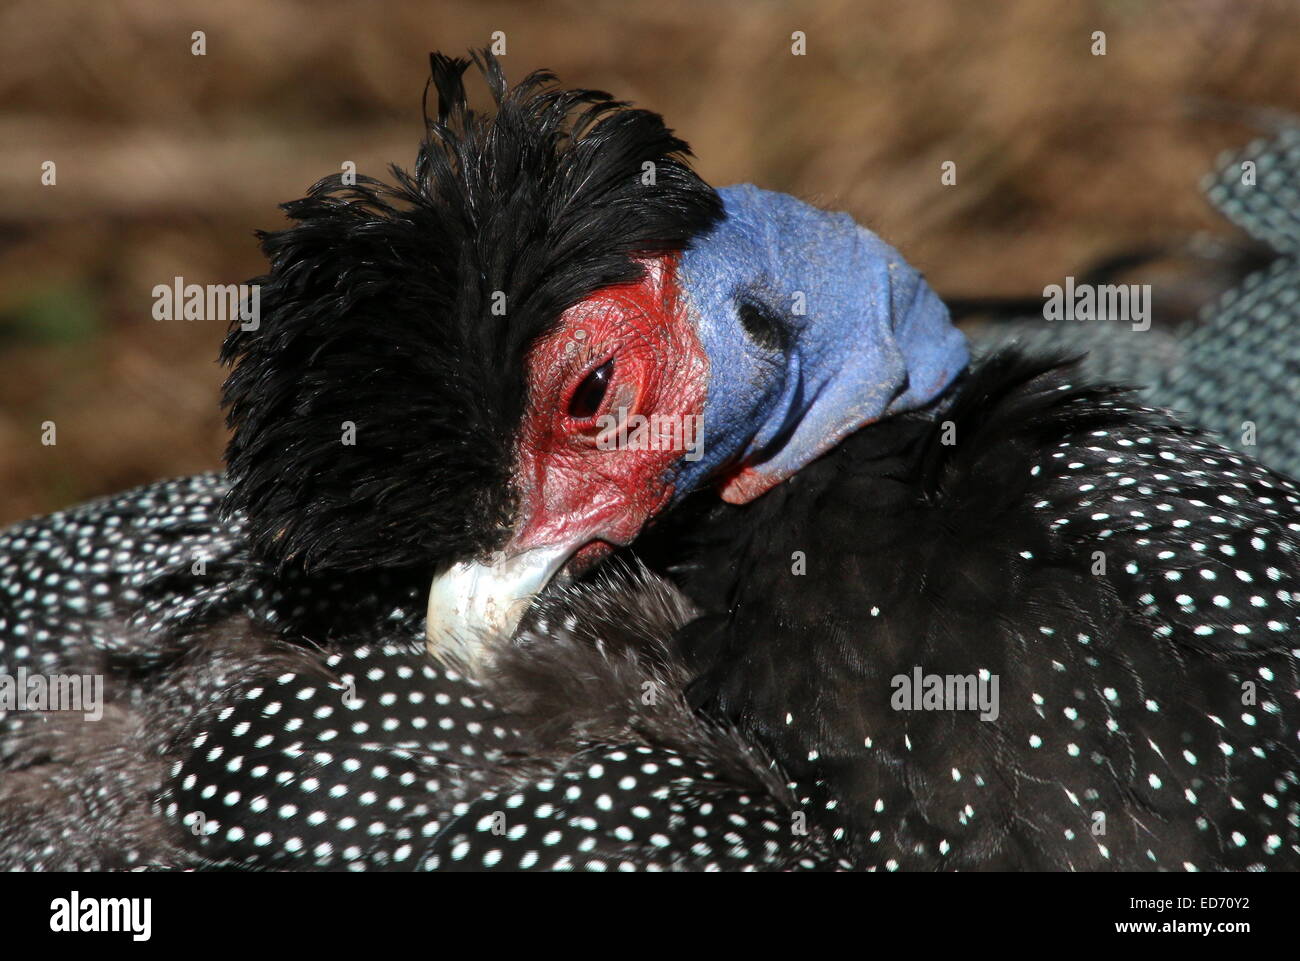 African Crested guineafowl (Guttera pucherani), close-up of the head while preening his feathers Stock Photo